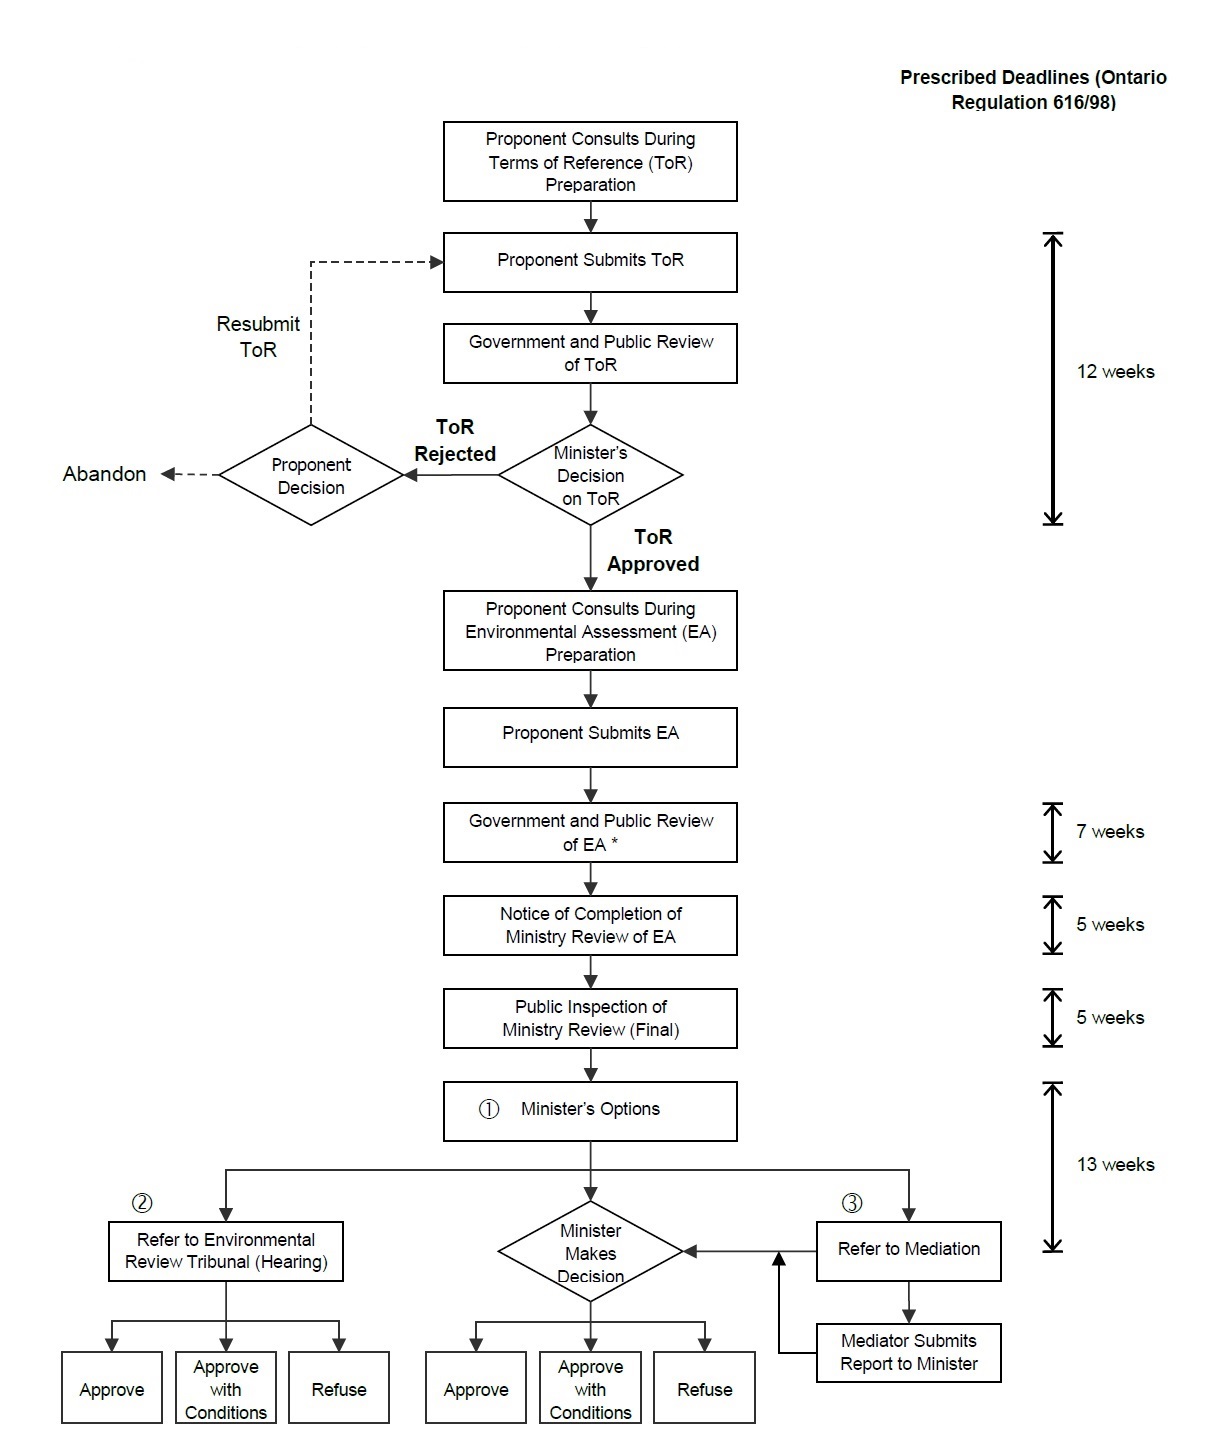 Figure a1 is a flowchart of the Environmental Assessment Process which is described below.